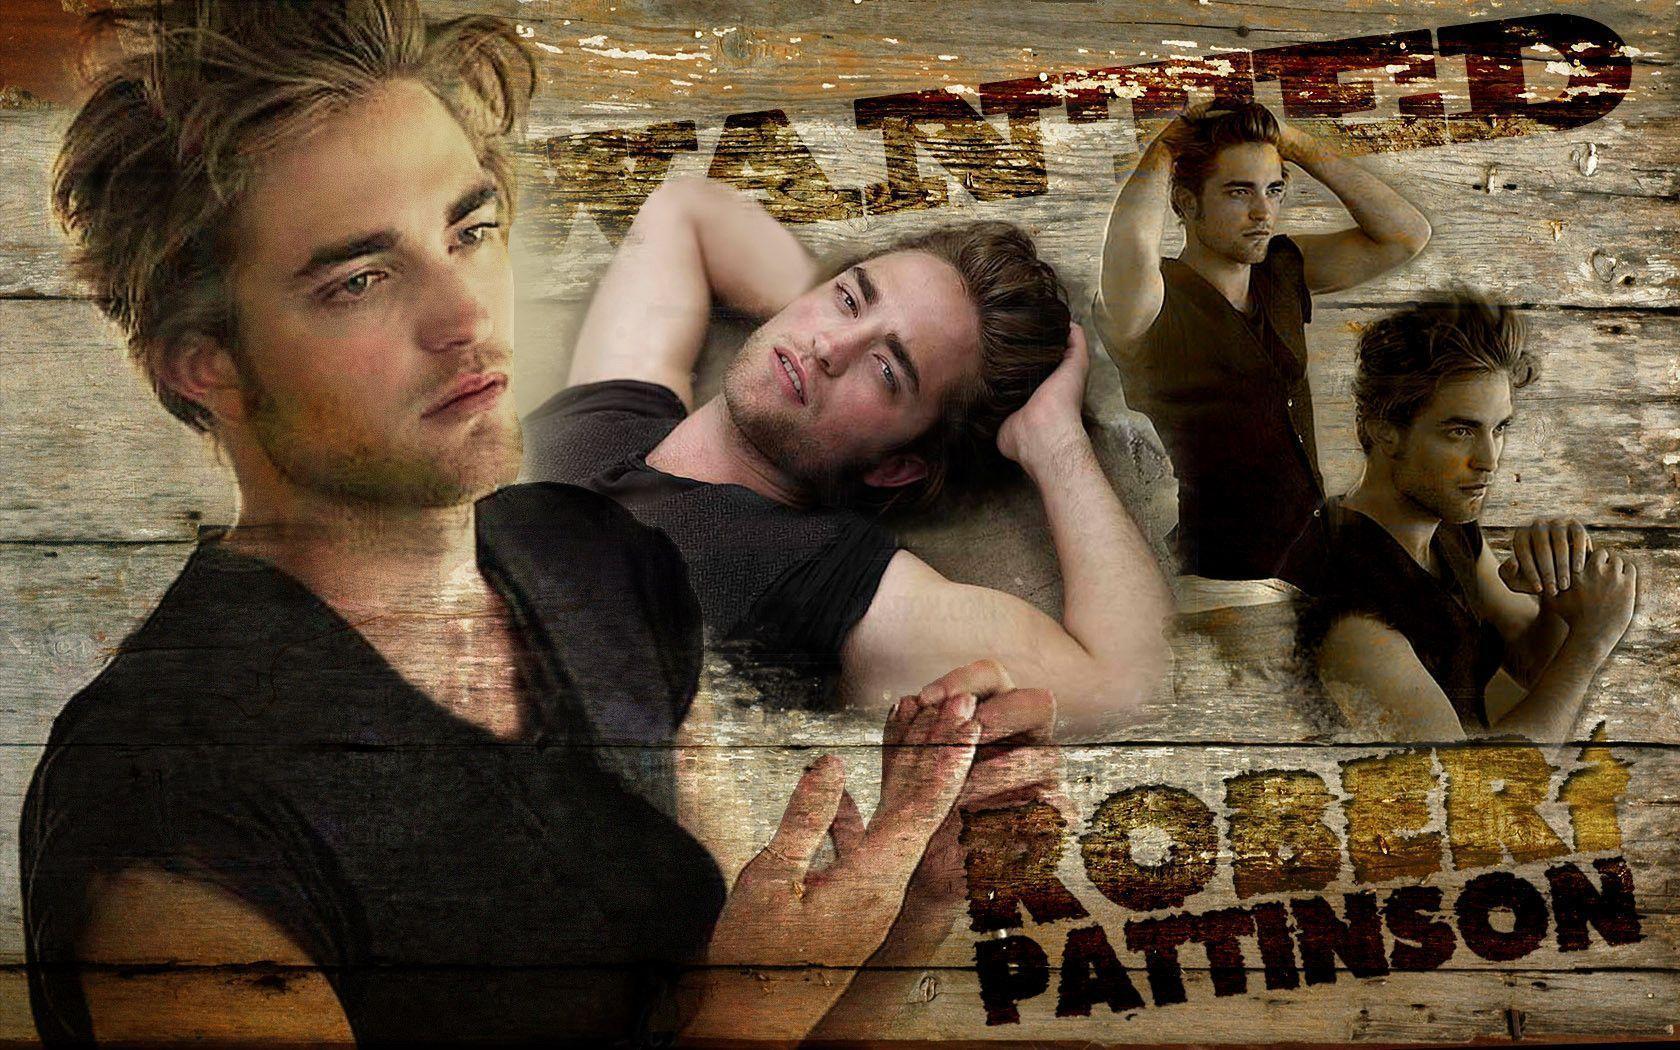 Robert Pattinson from Twilight HD Actor Wallpaper on ActorFaces